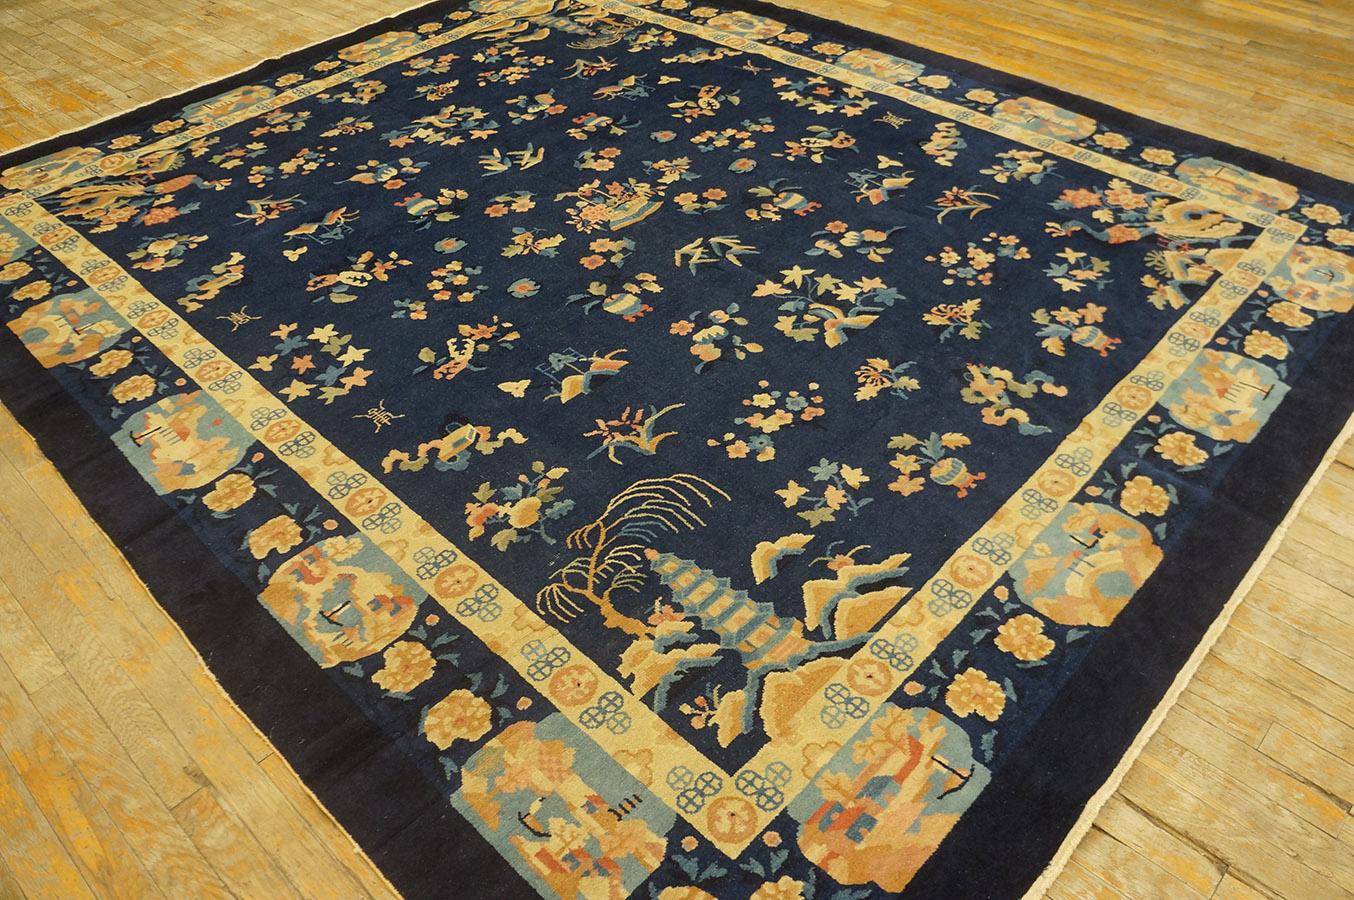 Antique Chinese Art Deco rug, size: 8' 2''x 9' 10''.